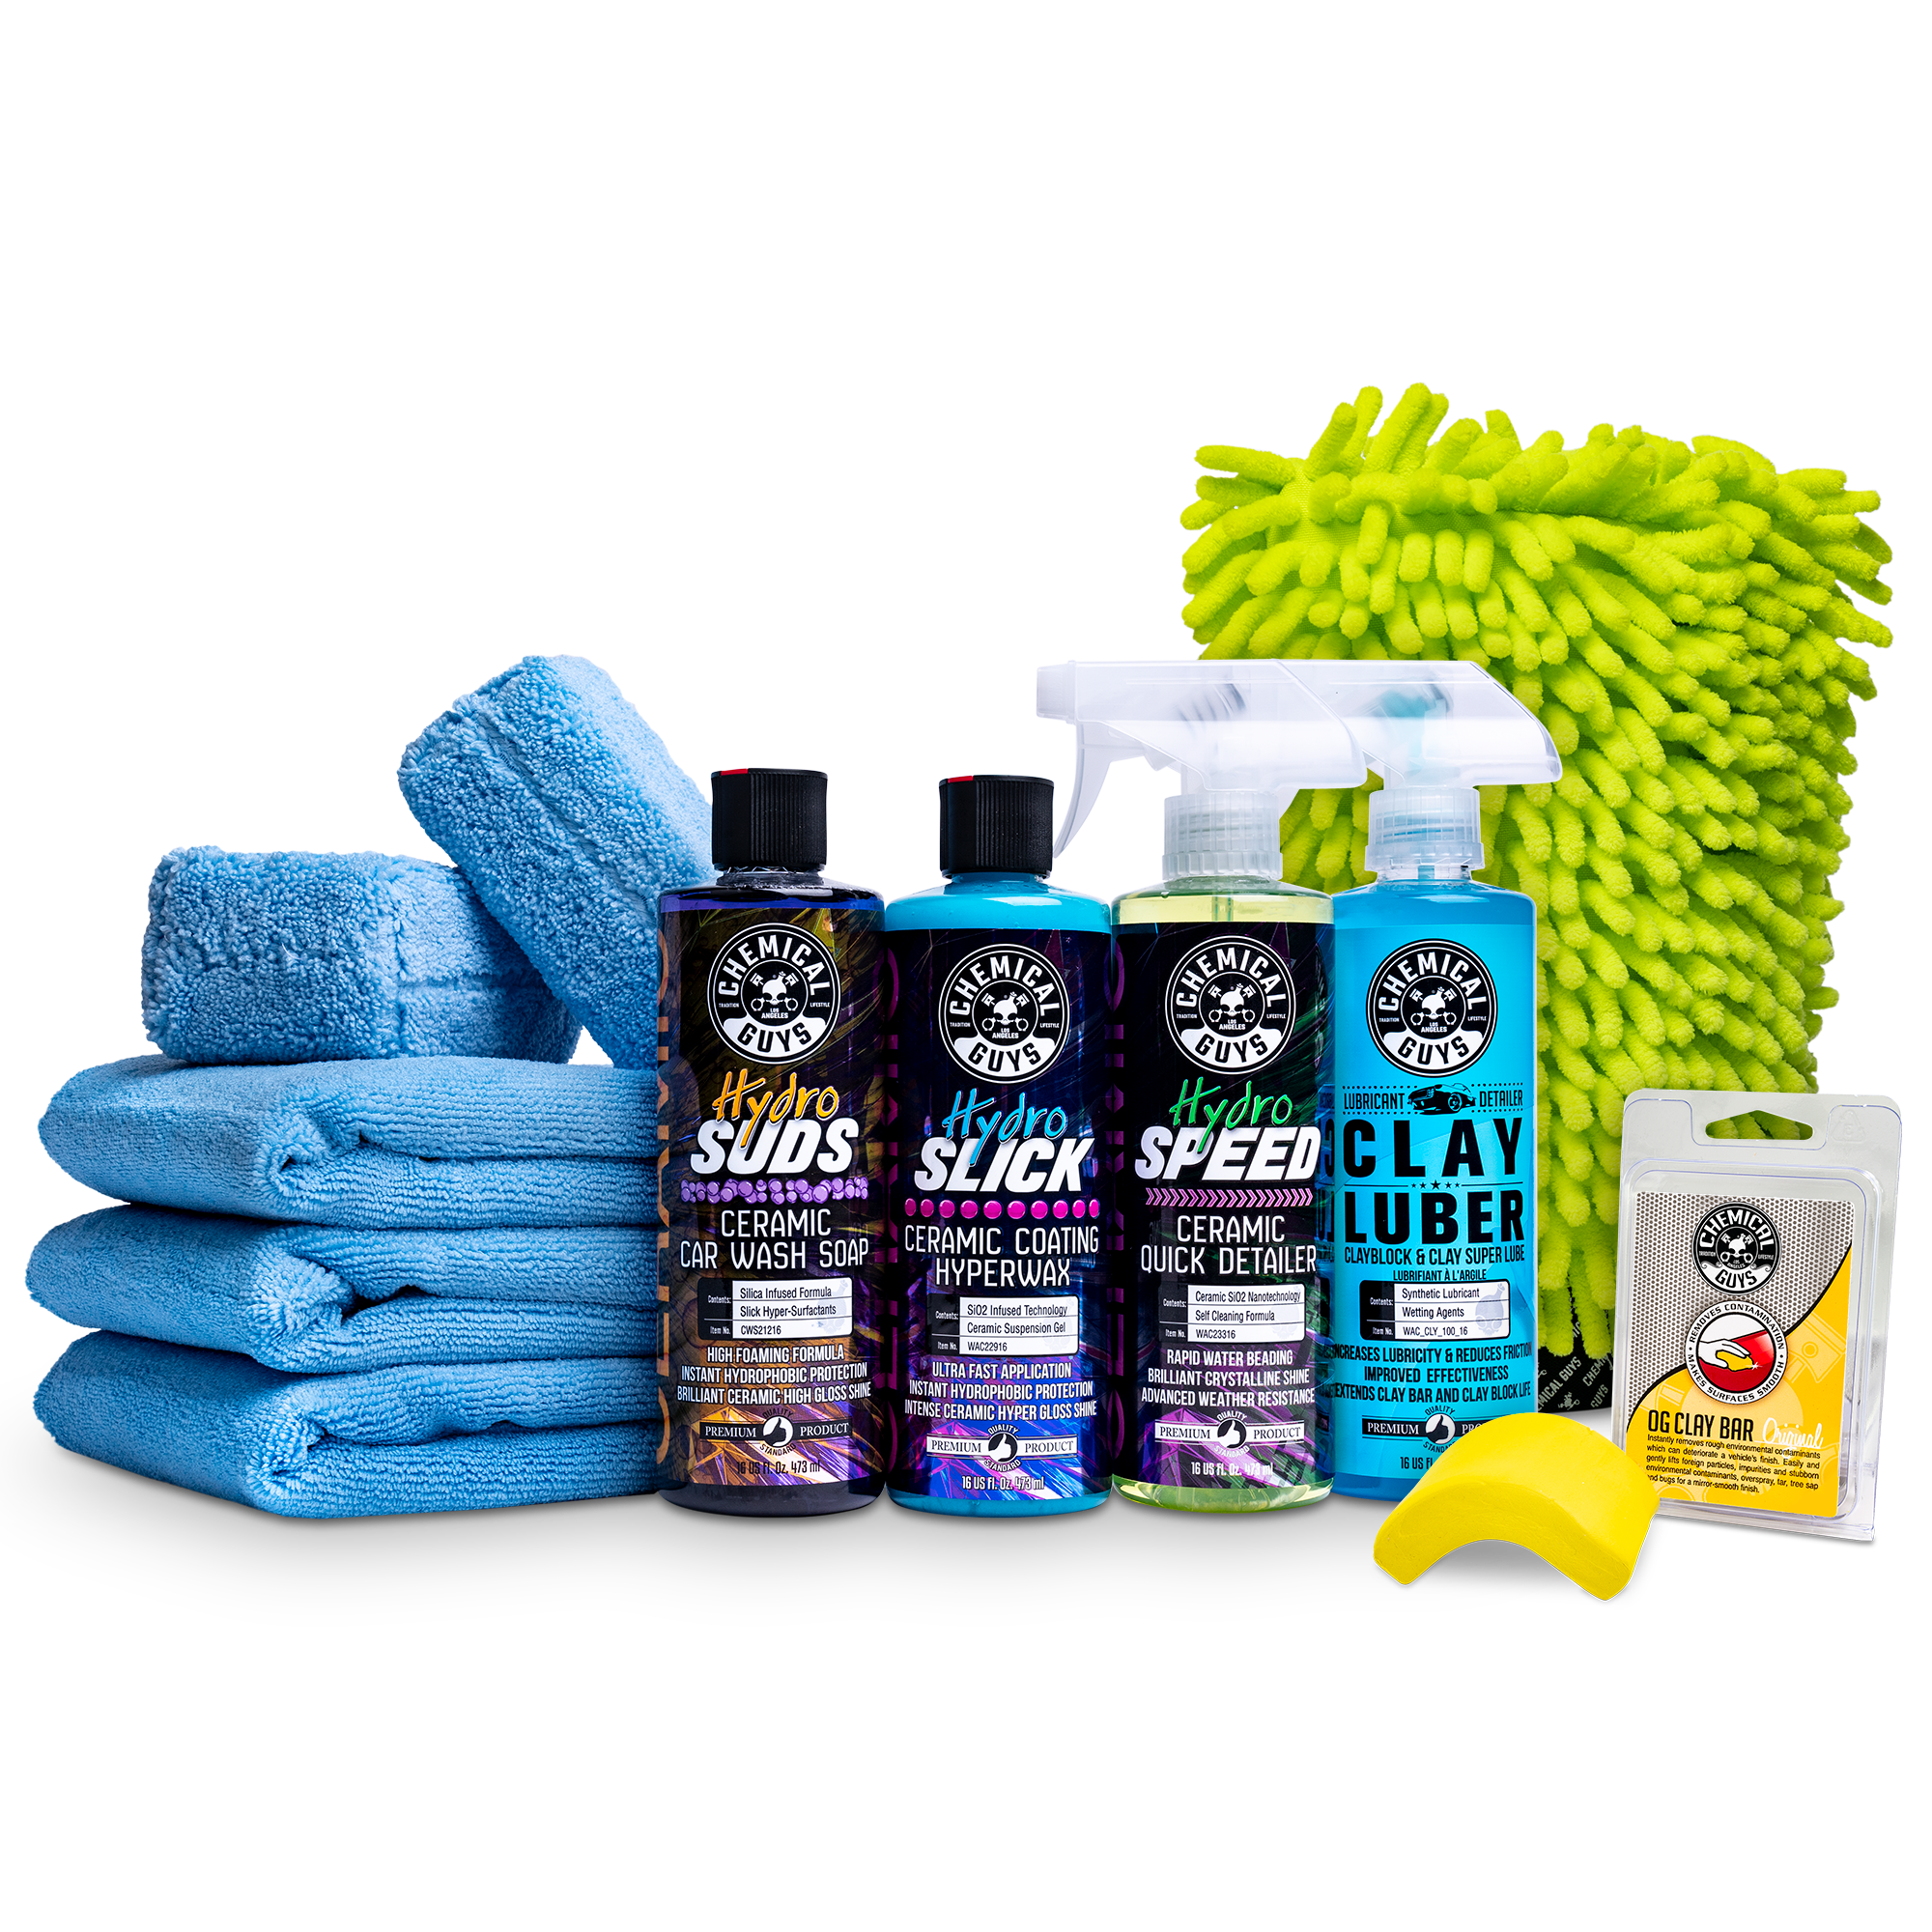 Walmart  Chemical Guy Essential Car Detailing Kit Under $30 (Way Cheaper  Than Getting Your Car Detailed)